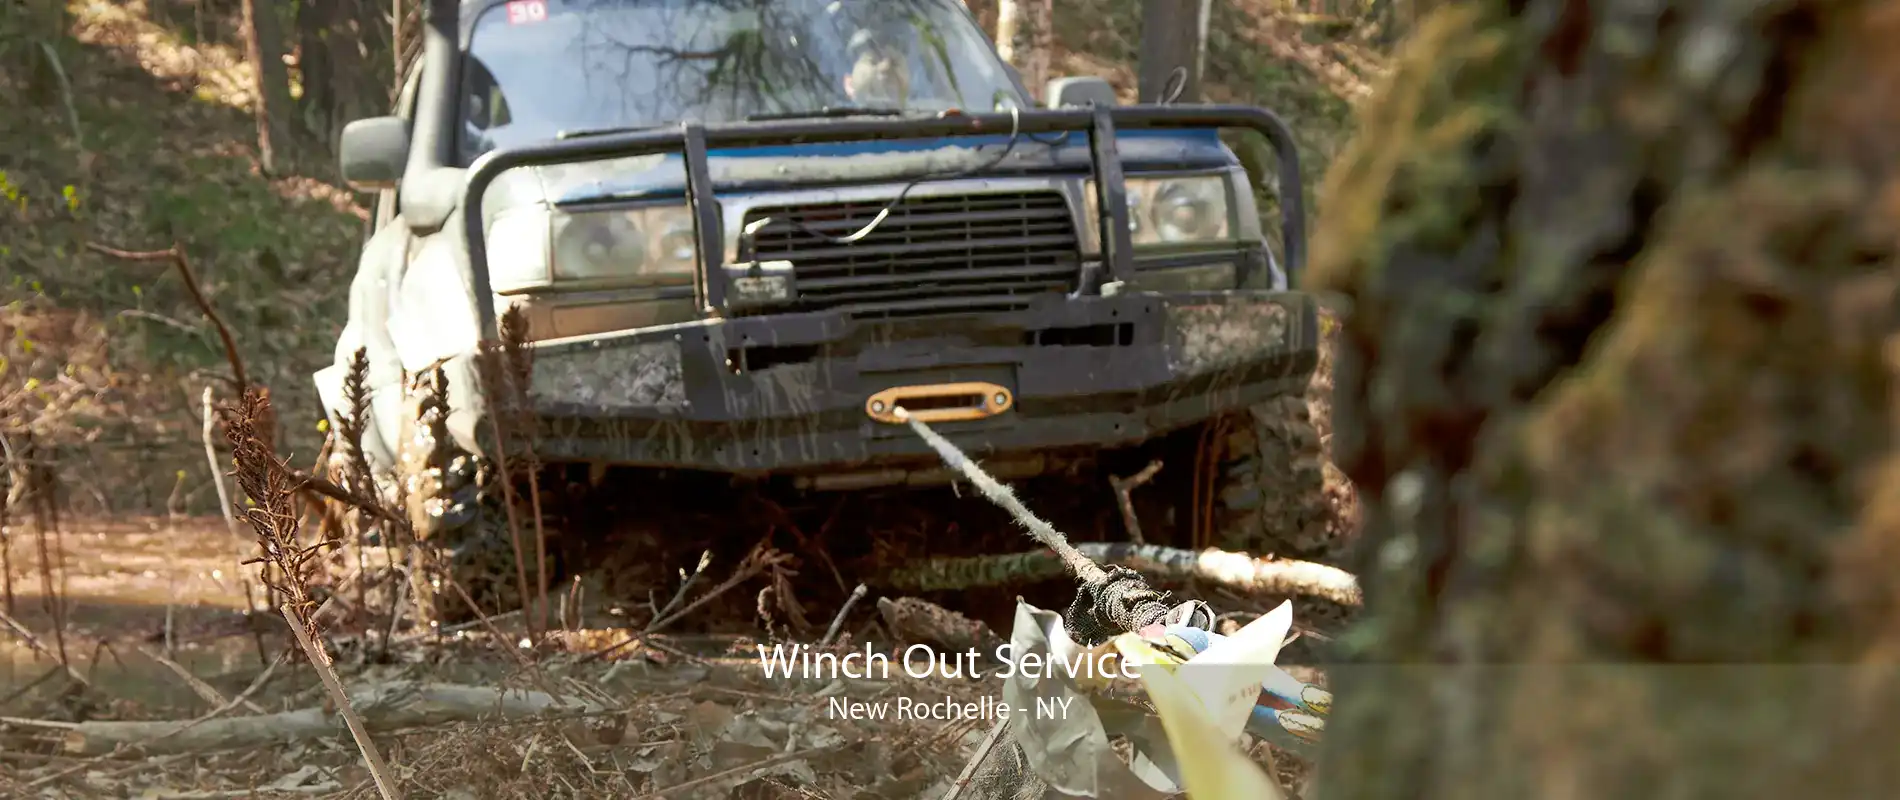 Winch Out Service New Rochelle - NY